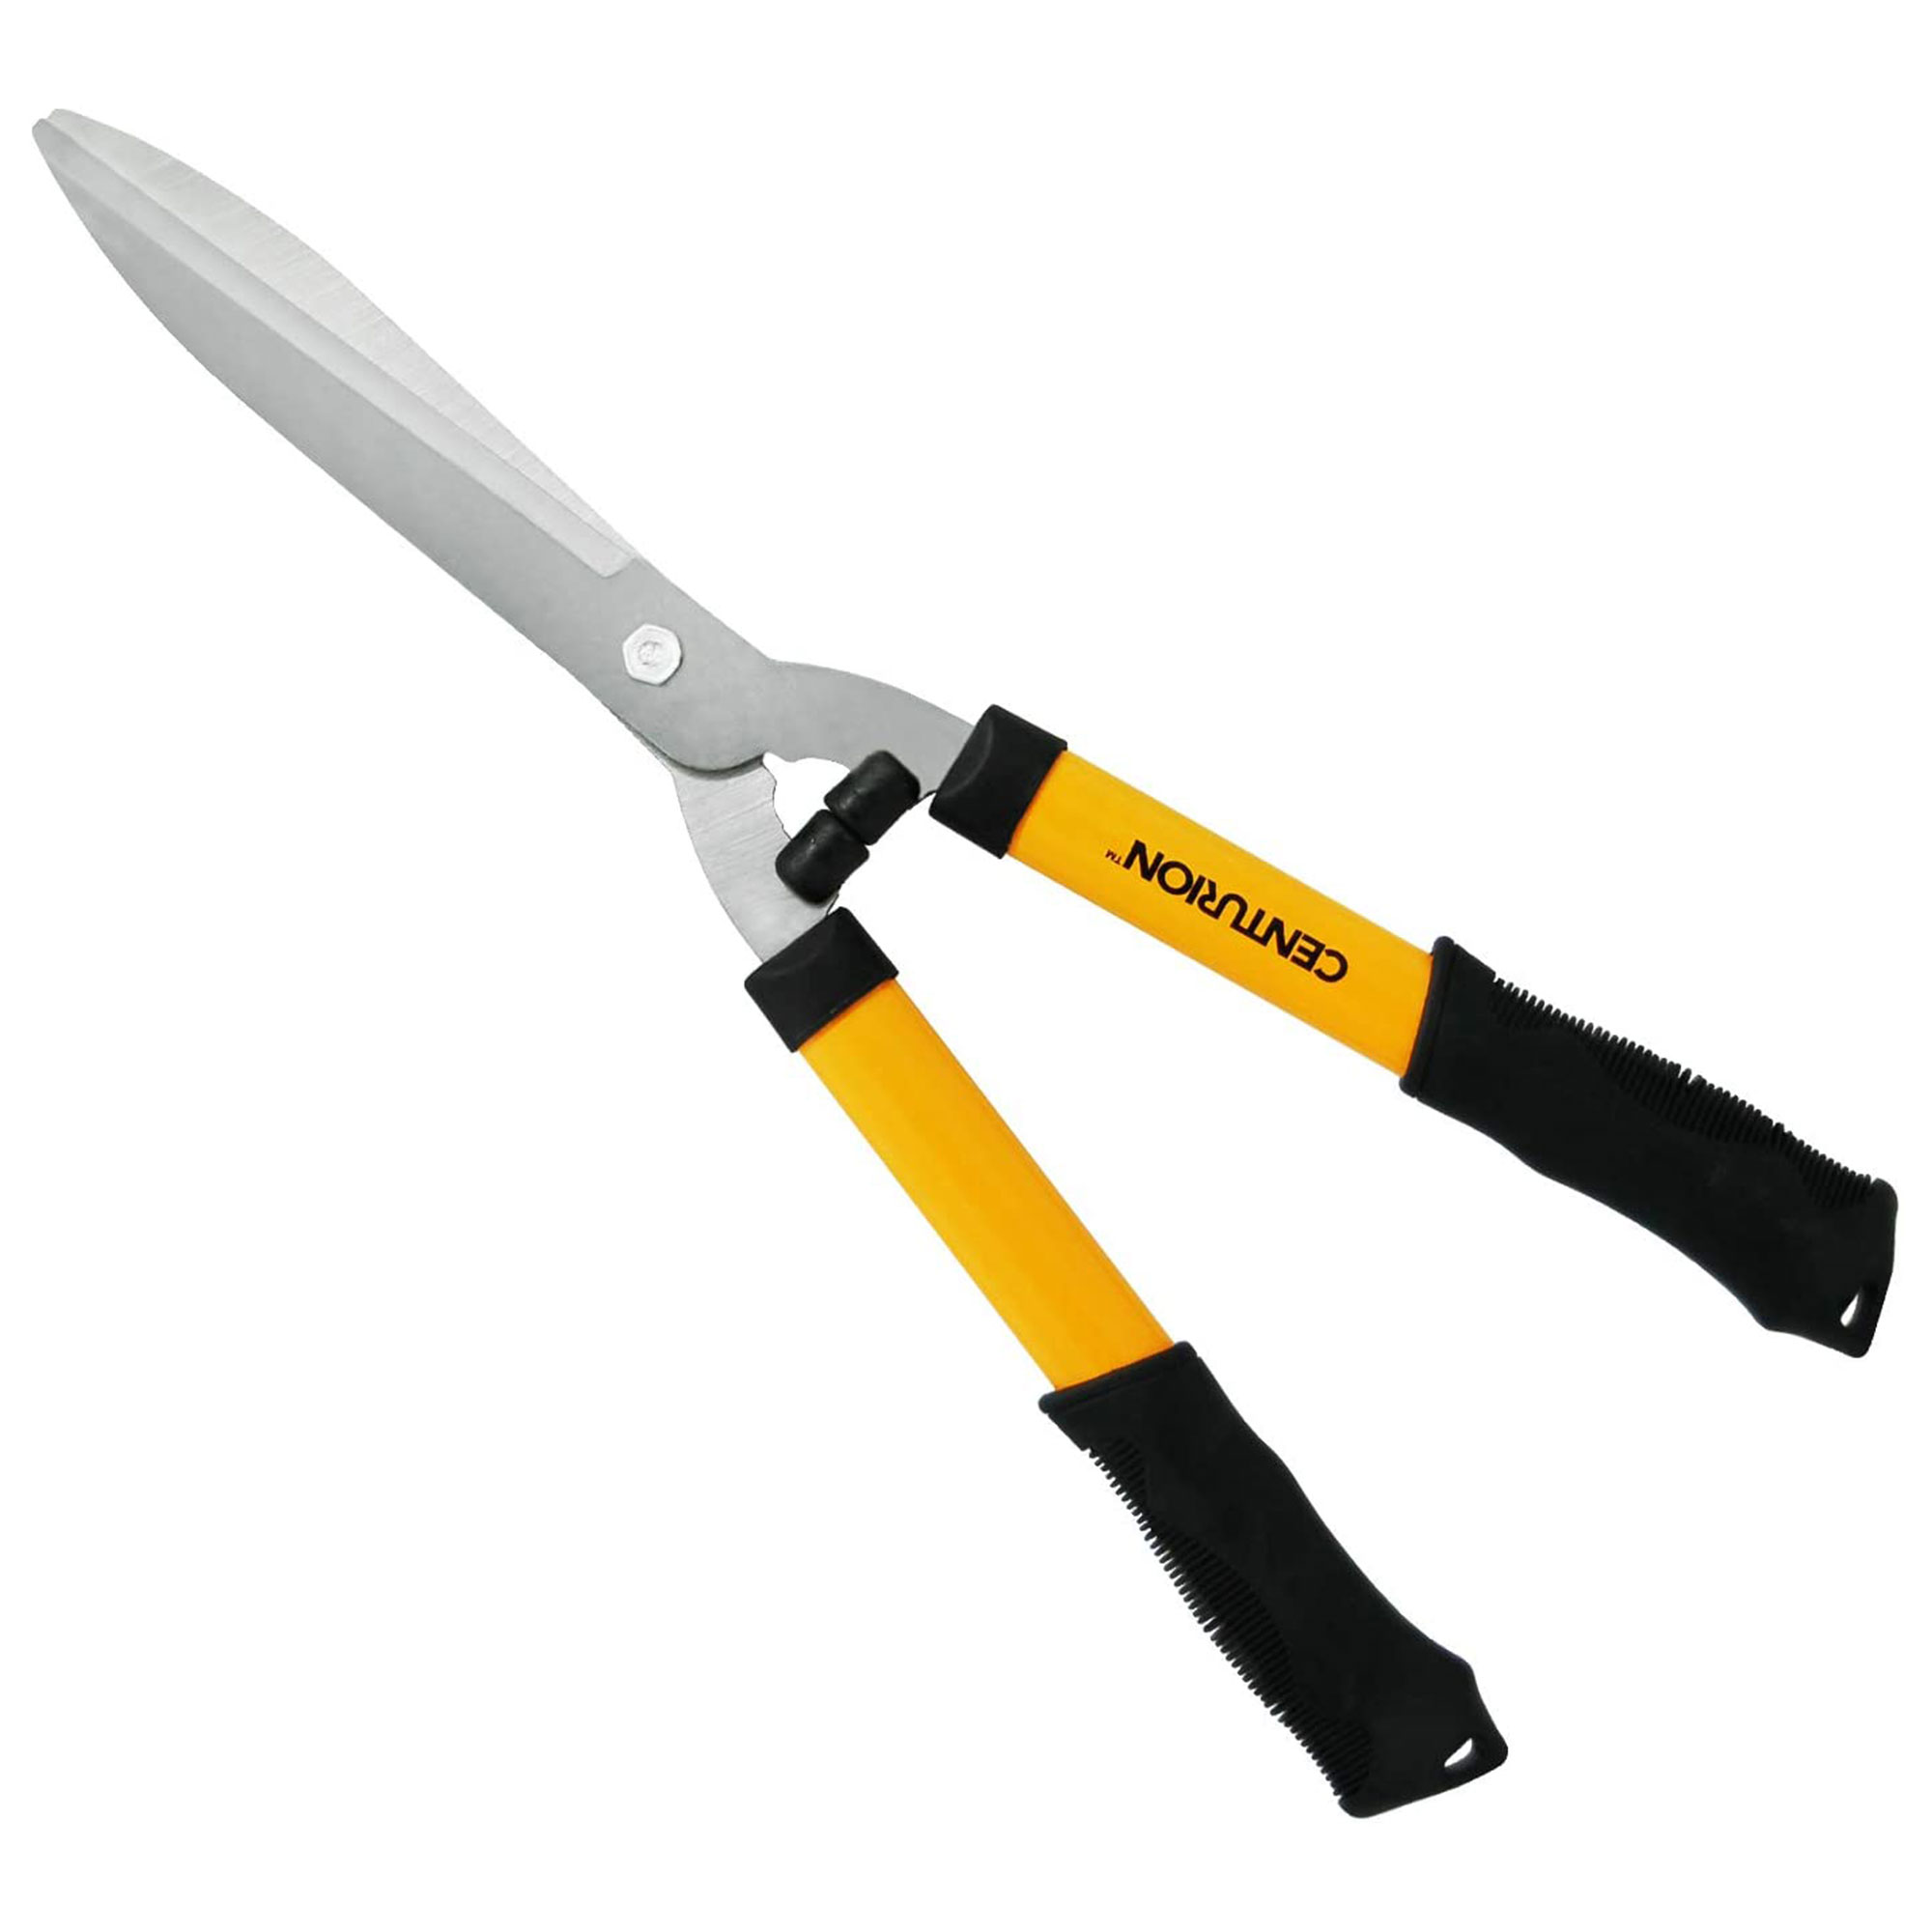 CENTURION 511 8 Inch Precision Steel Blades Hedge Shears w/ Non-Slip Grips - image 1 of 8